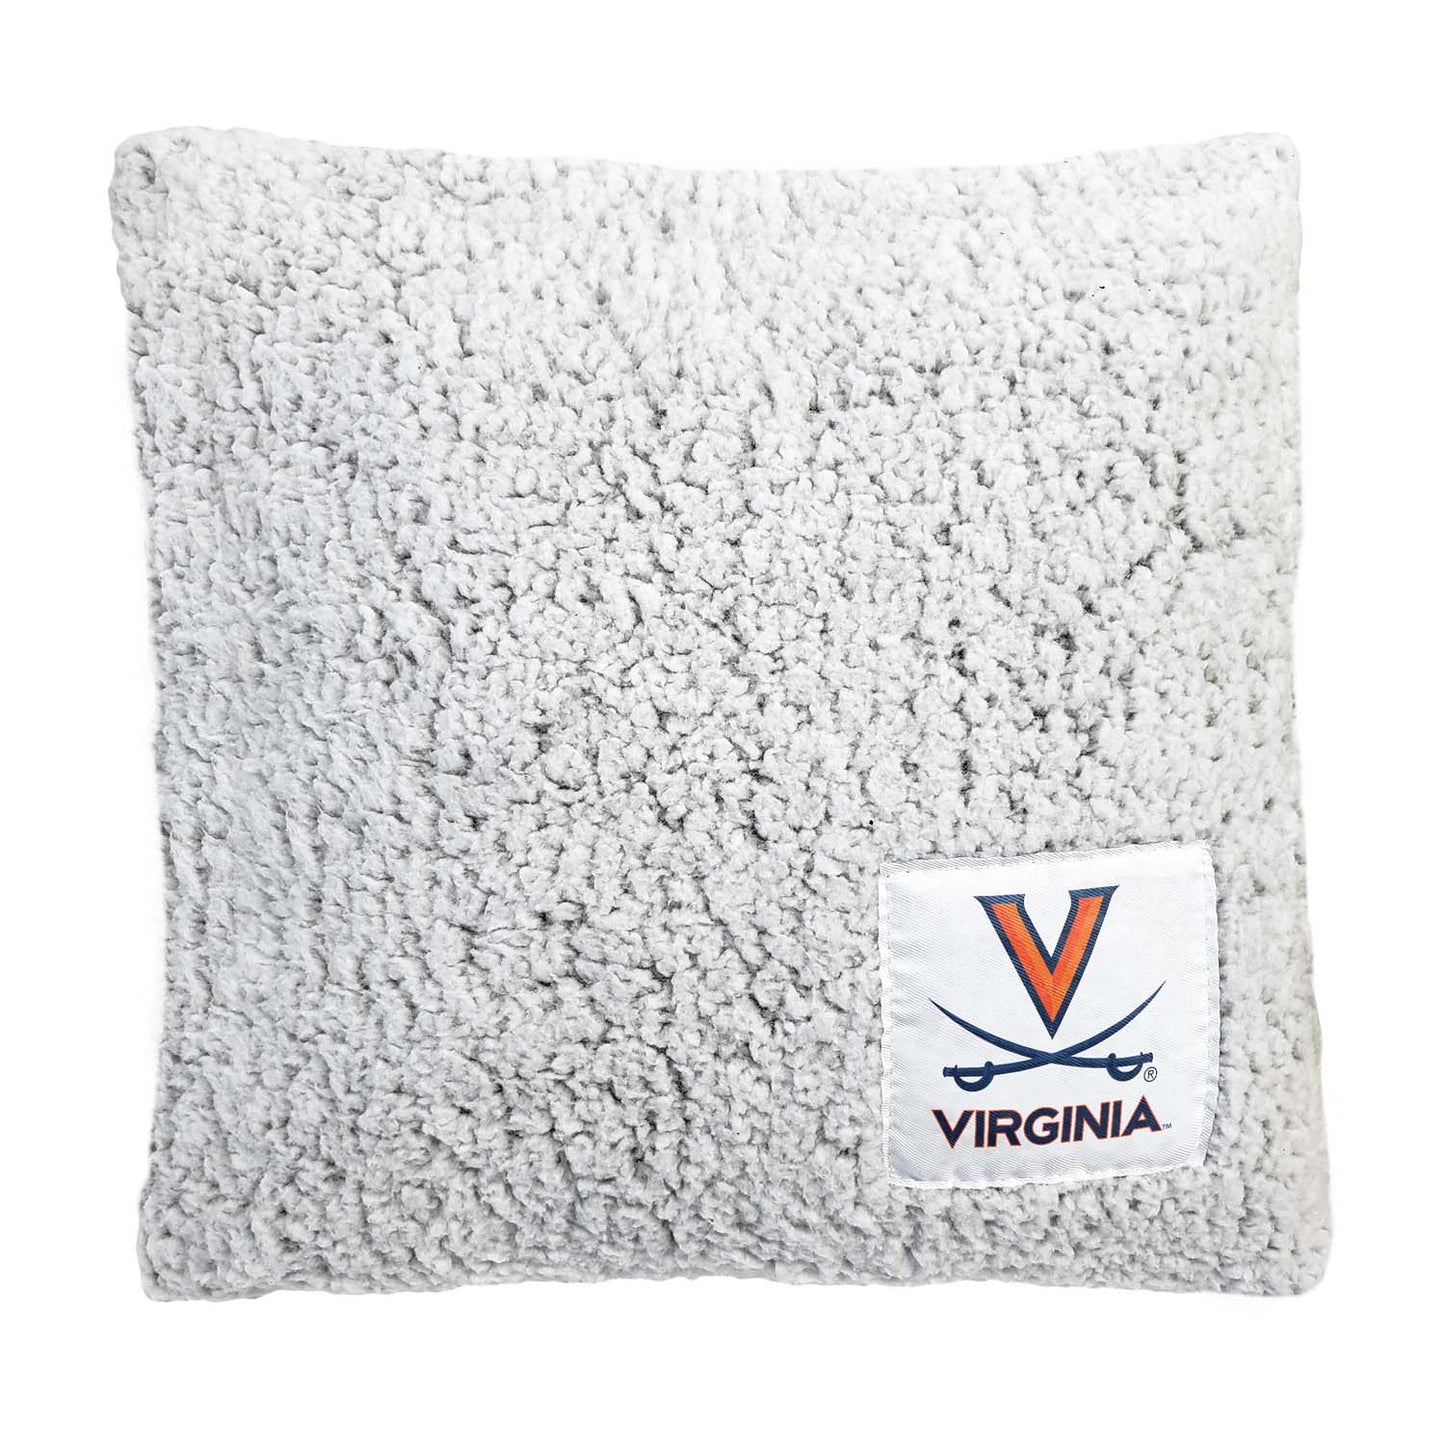 Virginia Cavaliers Two Tone Sherpa Throw Pillow - Team Color